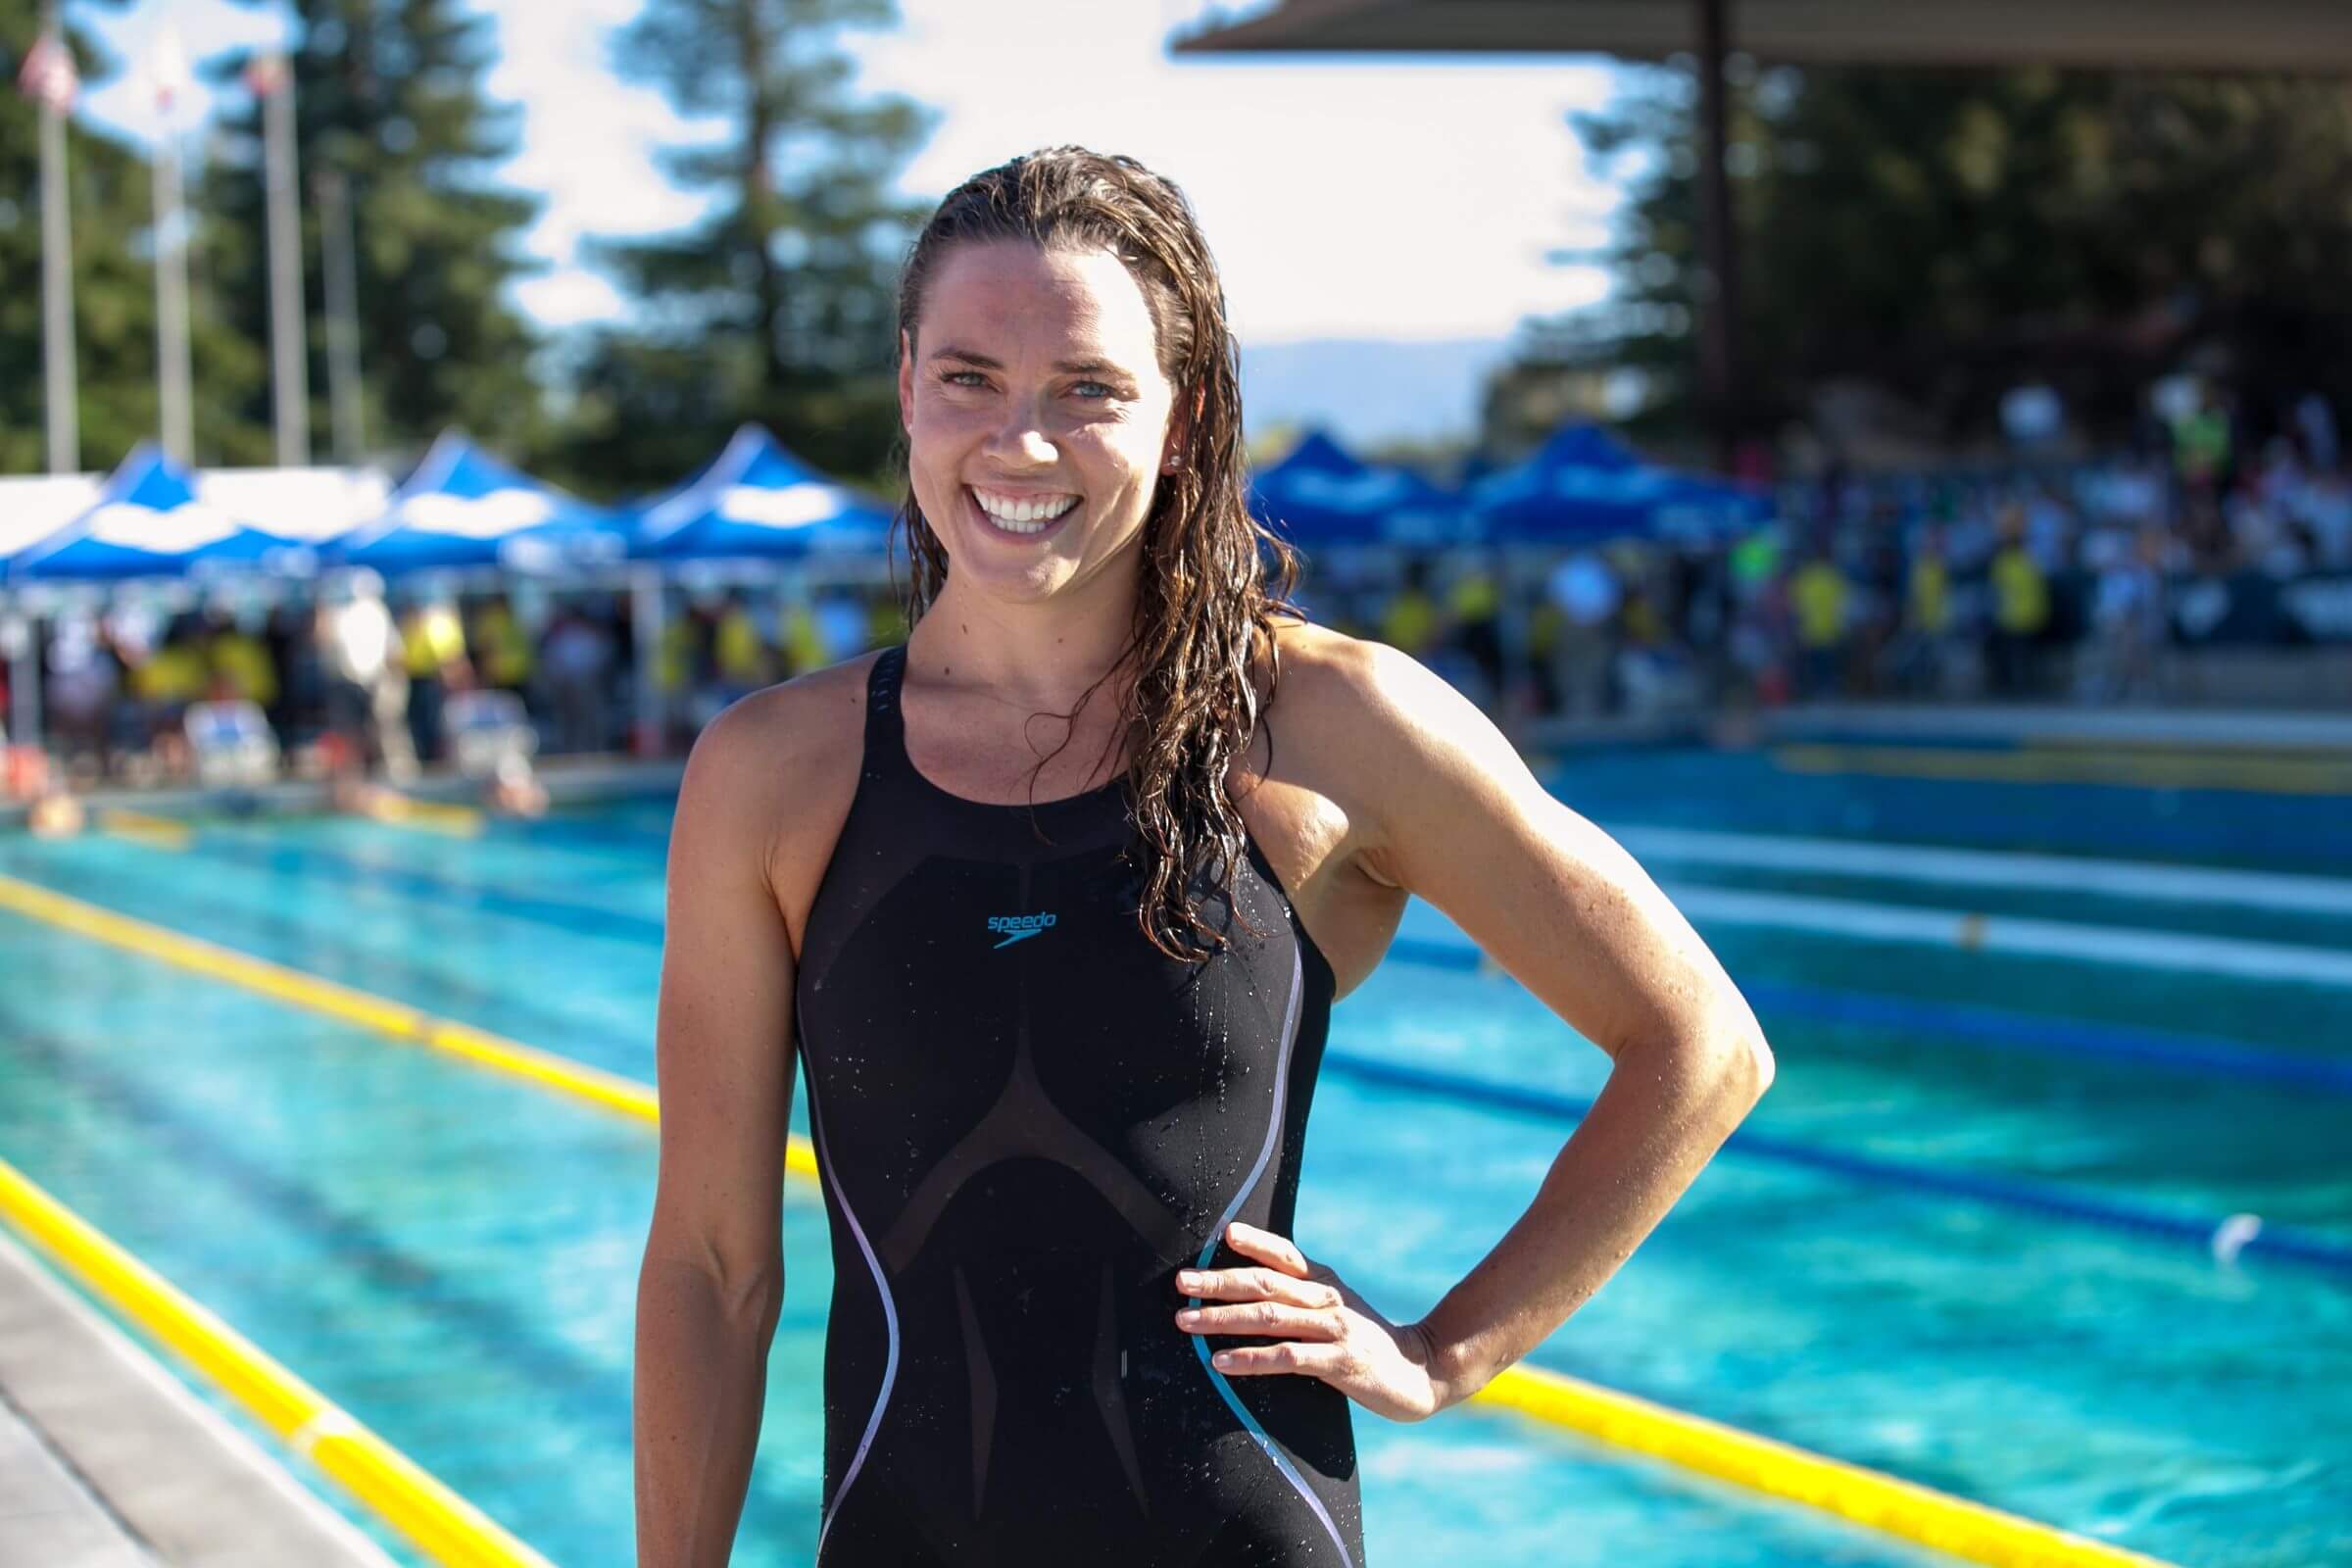 Race Videos: Watch All The Races From Night 2 at Arena Pro Swim